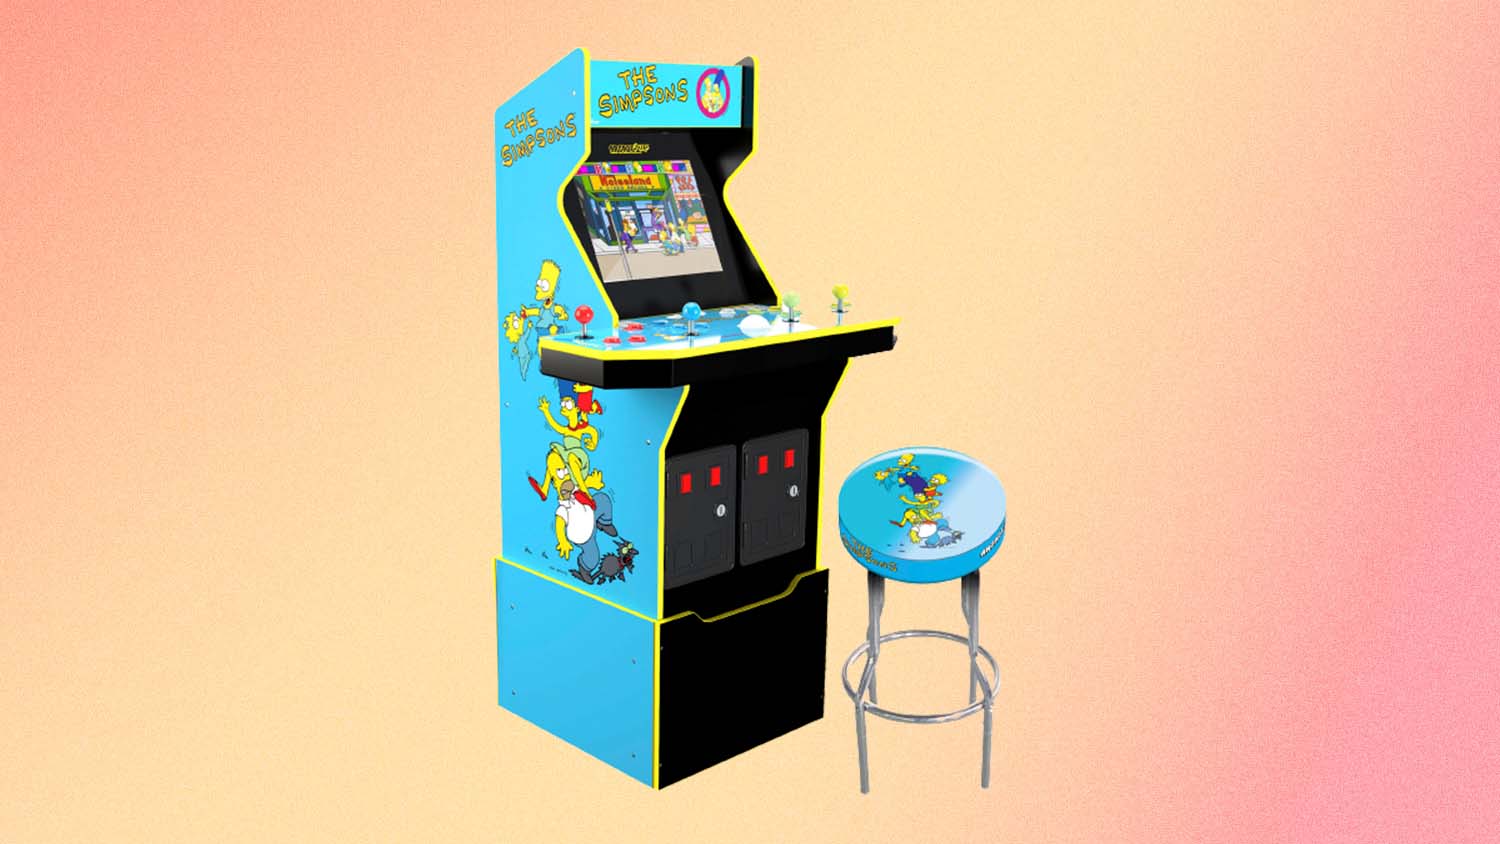 The Simpsons 30th Edition Arcade with matching stool, part of a larger sale on Arcade1Up gaming cabinets at Best Buy